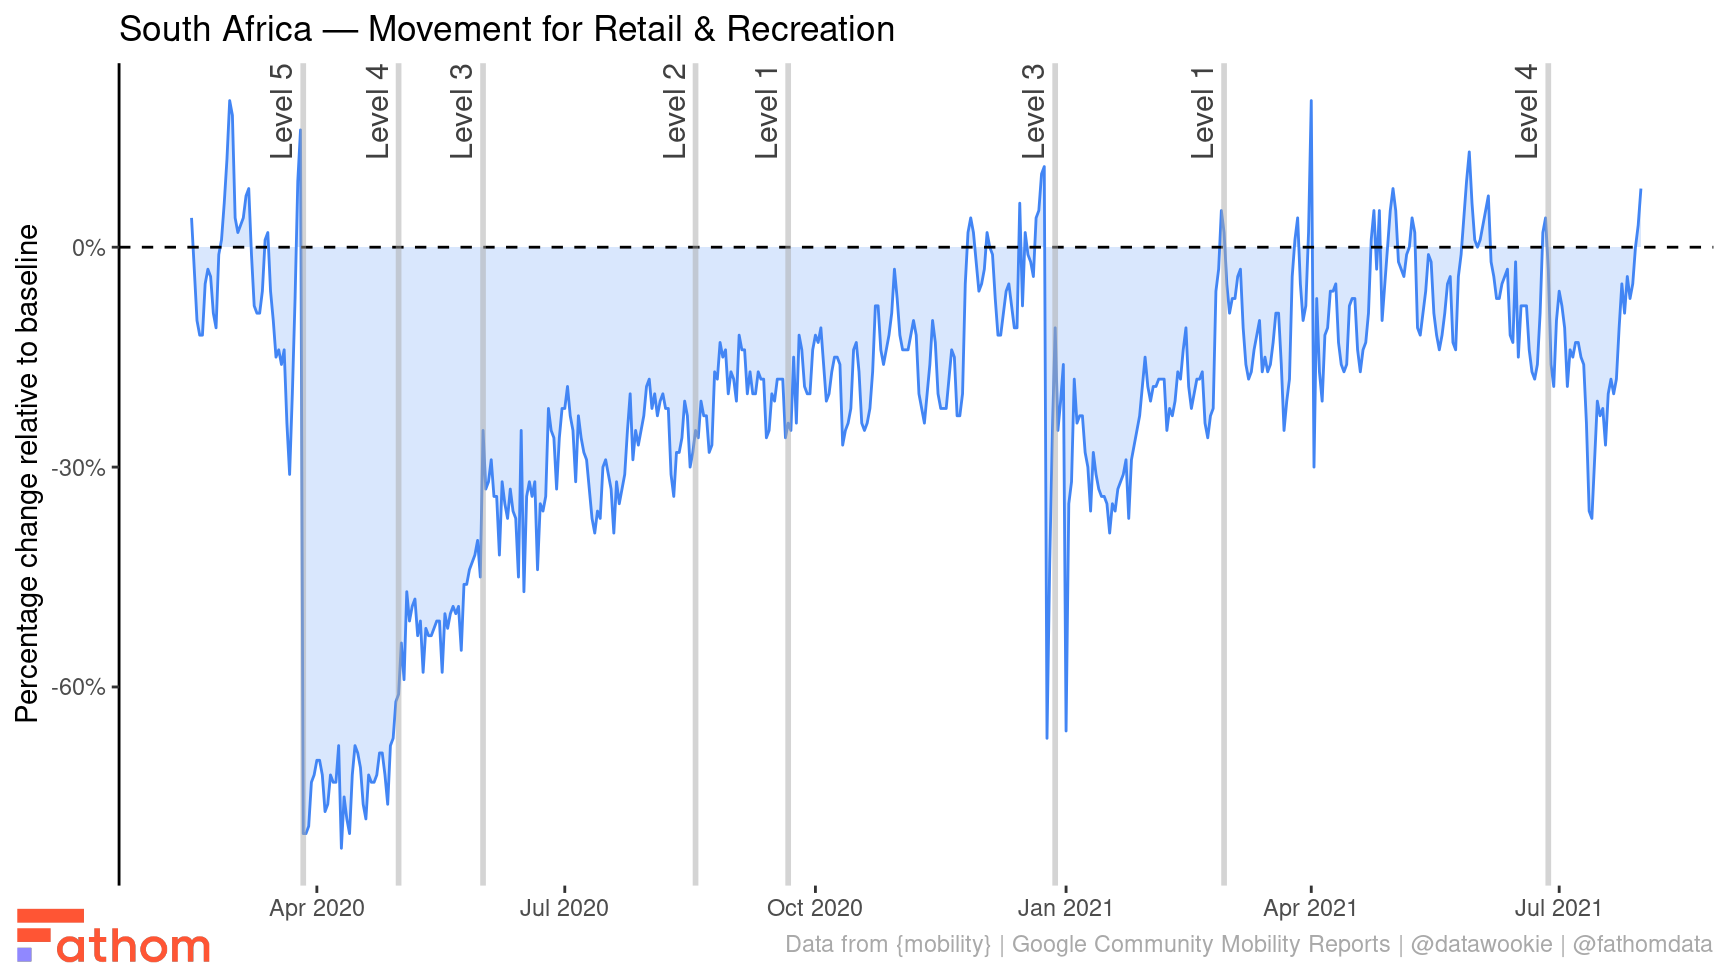 Changes in movement for retail & recreation in South Africa with historical dates from {saffer} package overlaid.